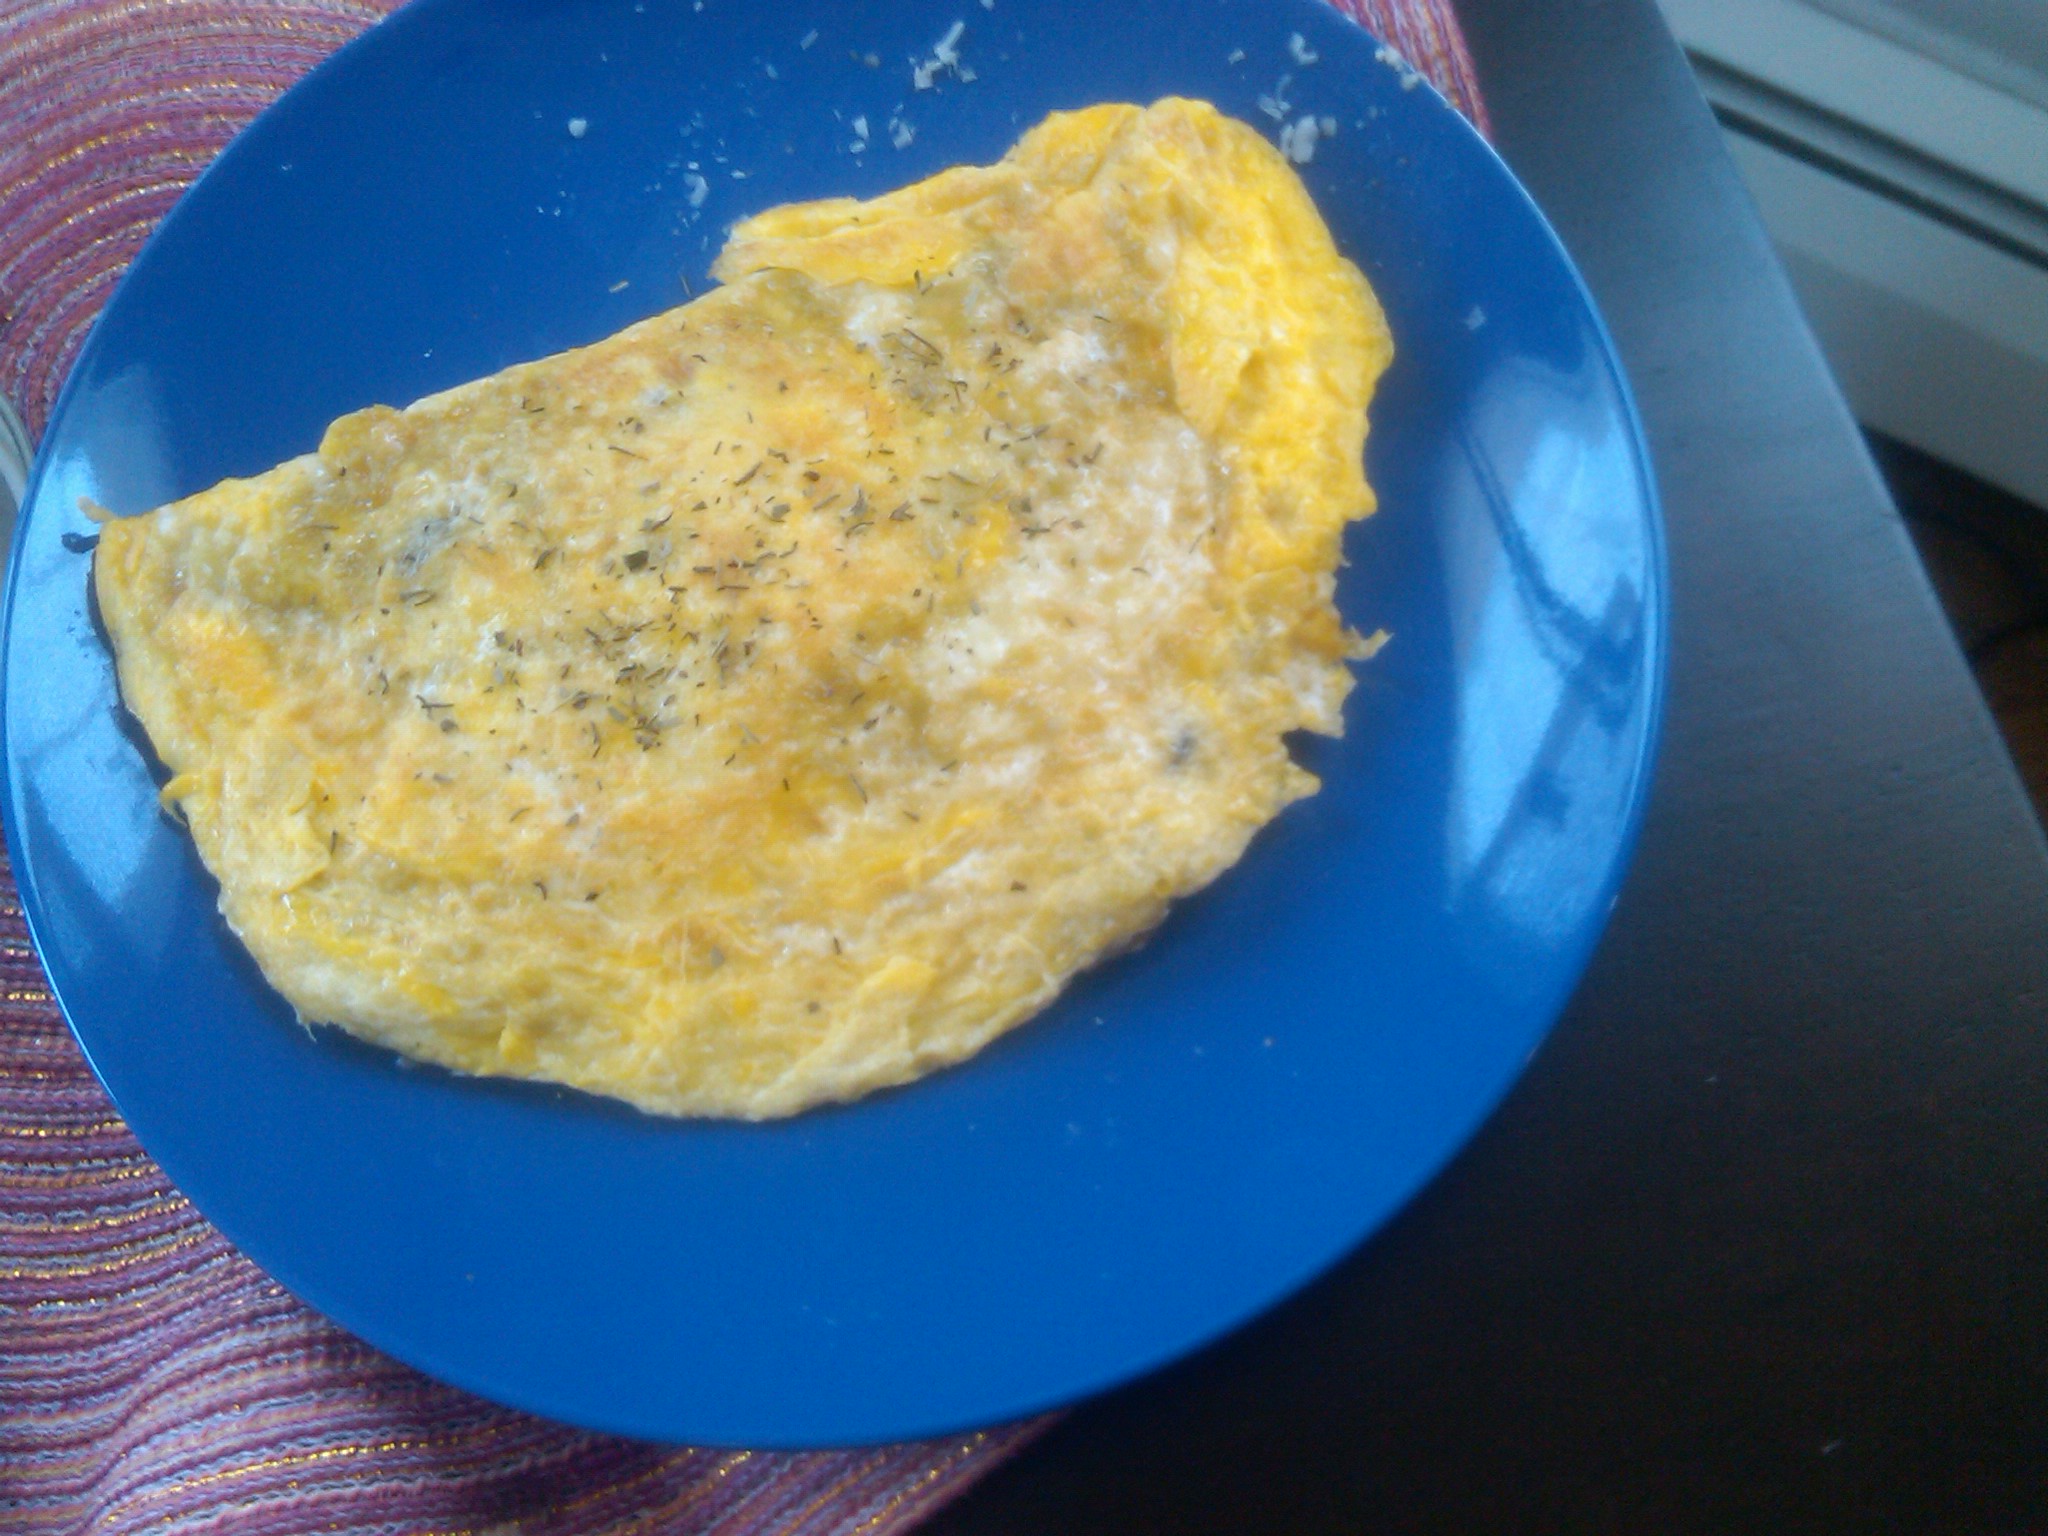 omelet done